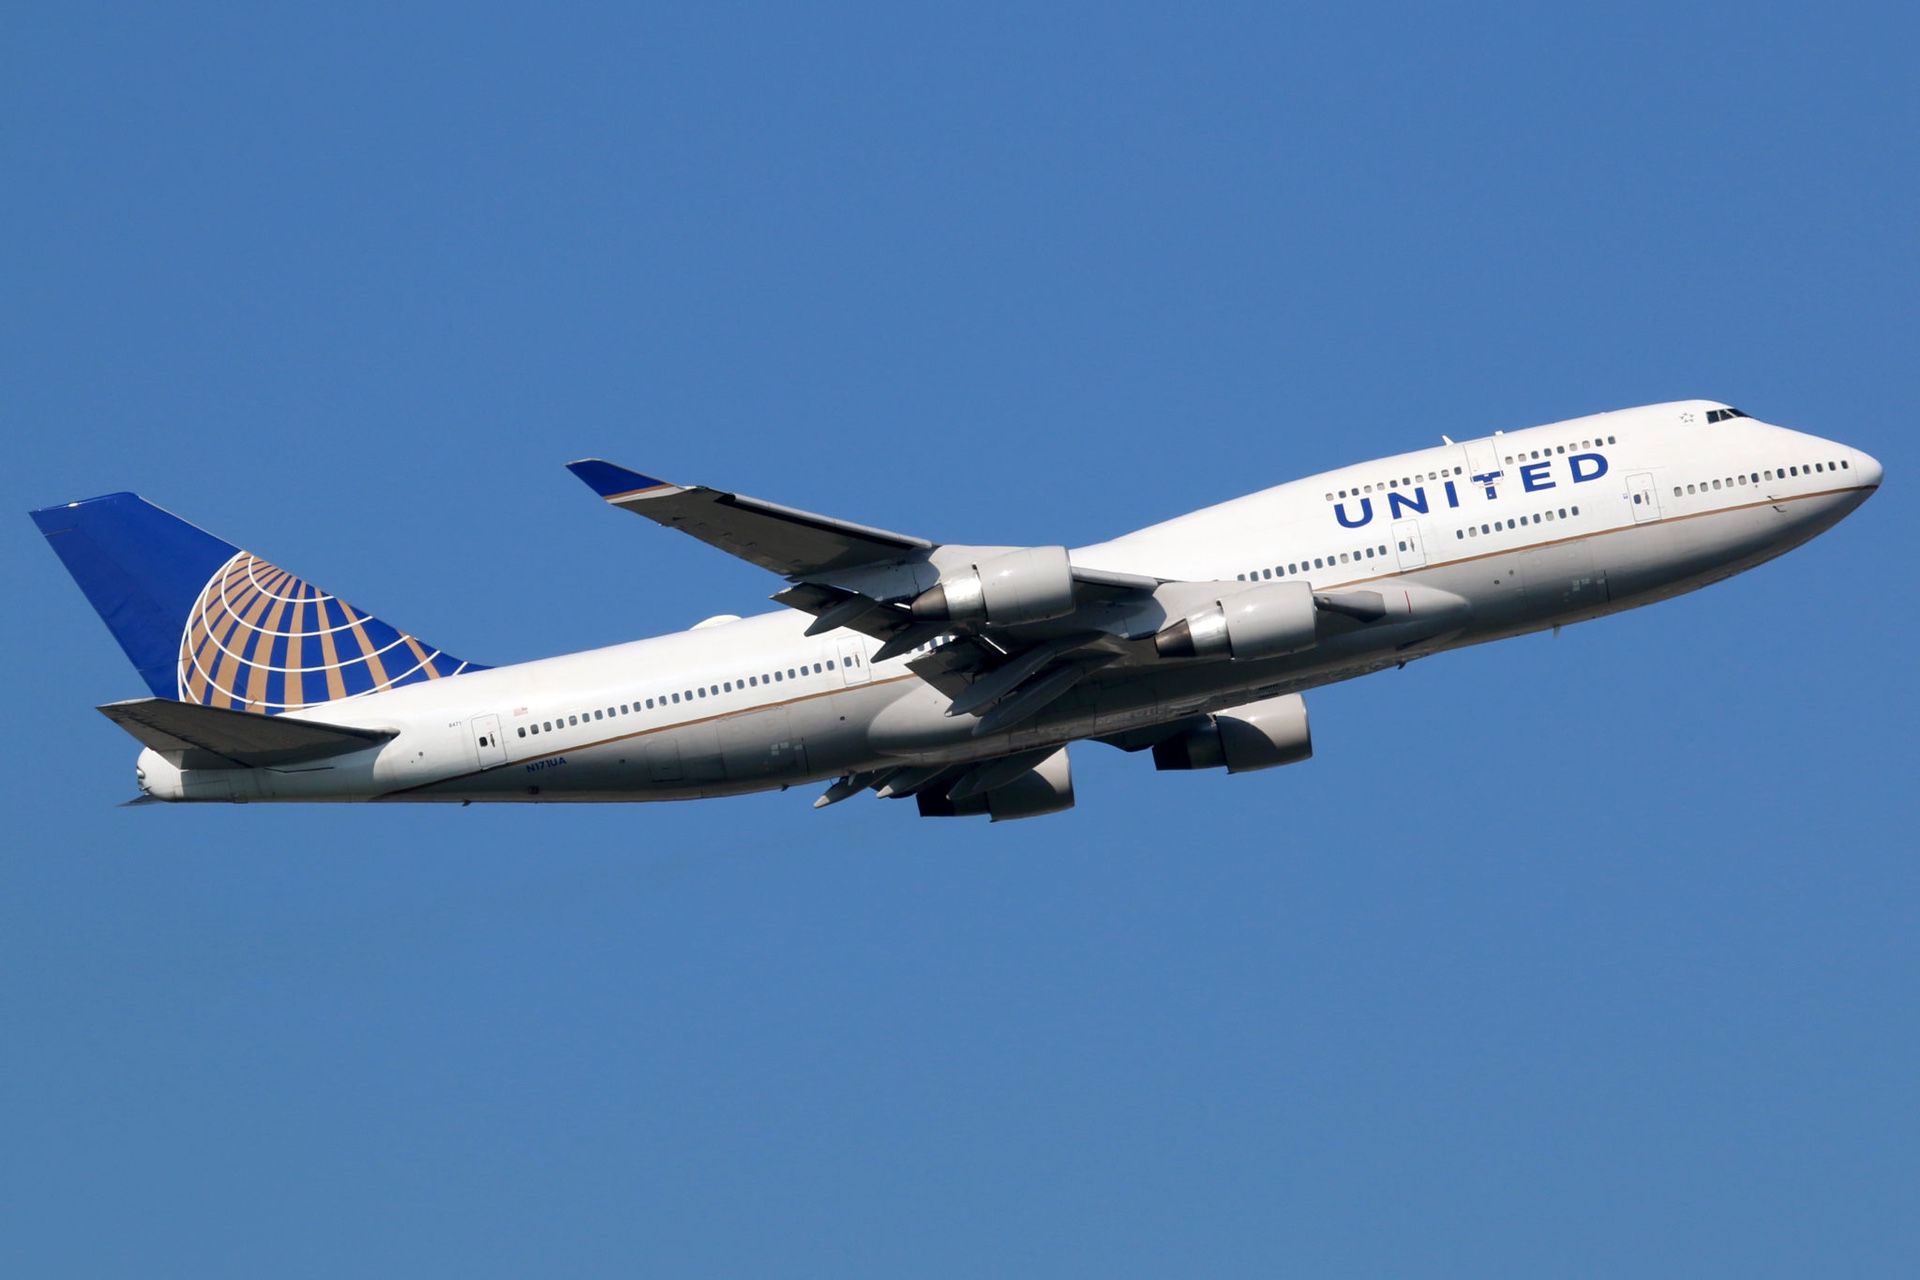 United Airlines Upgrade to Business or First Class